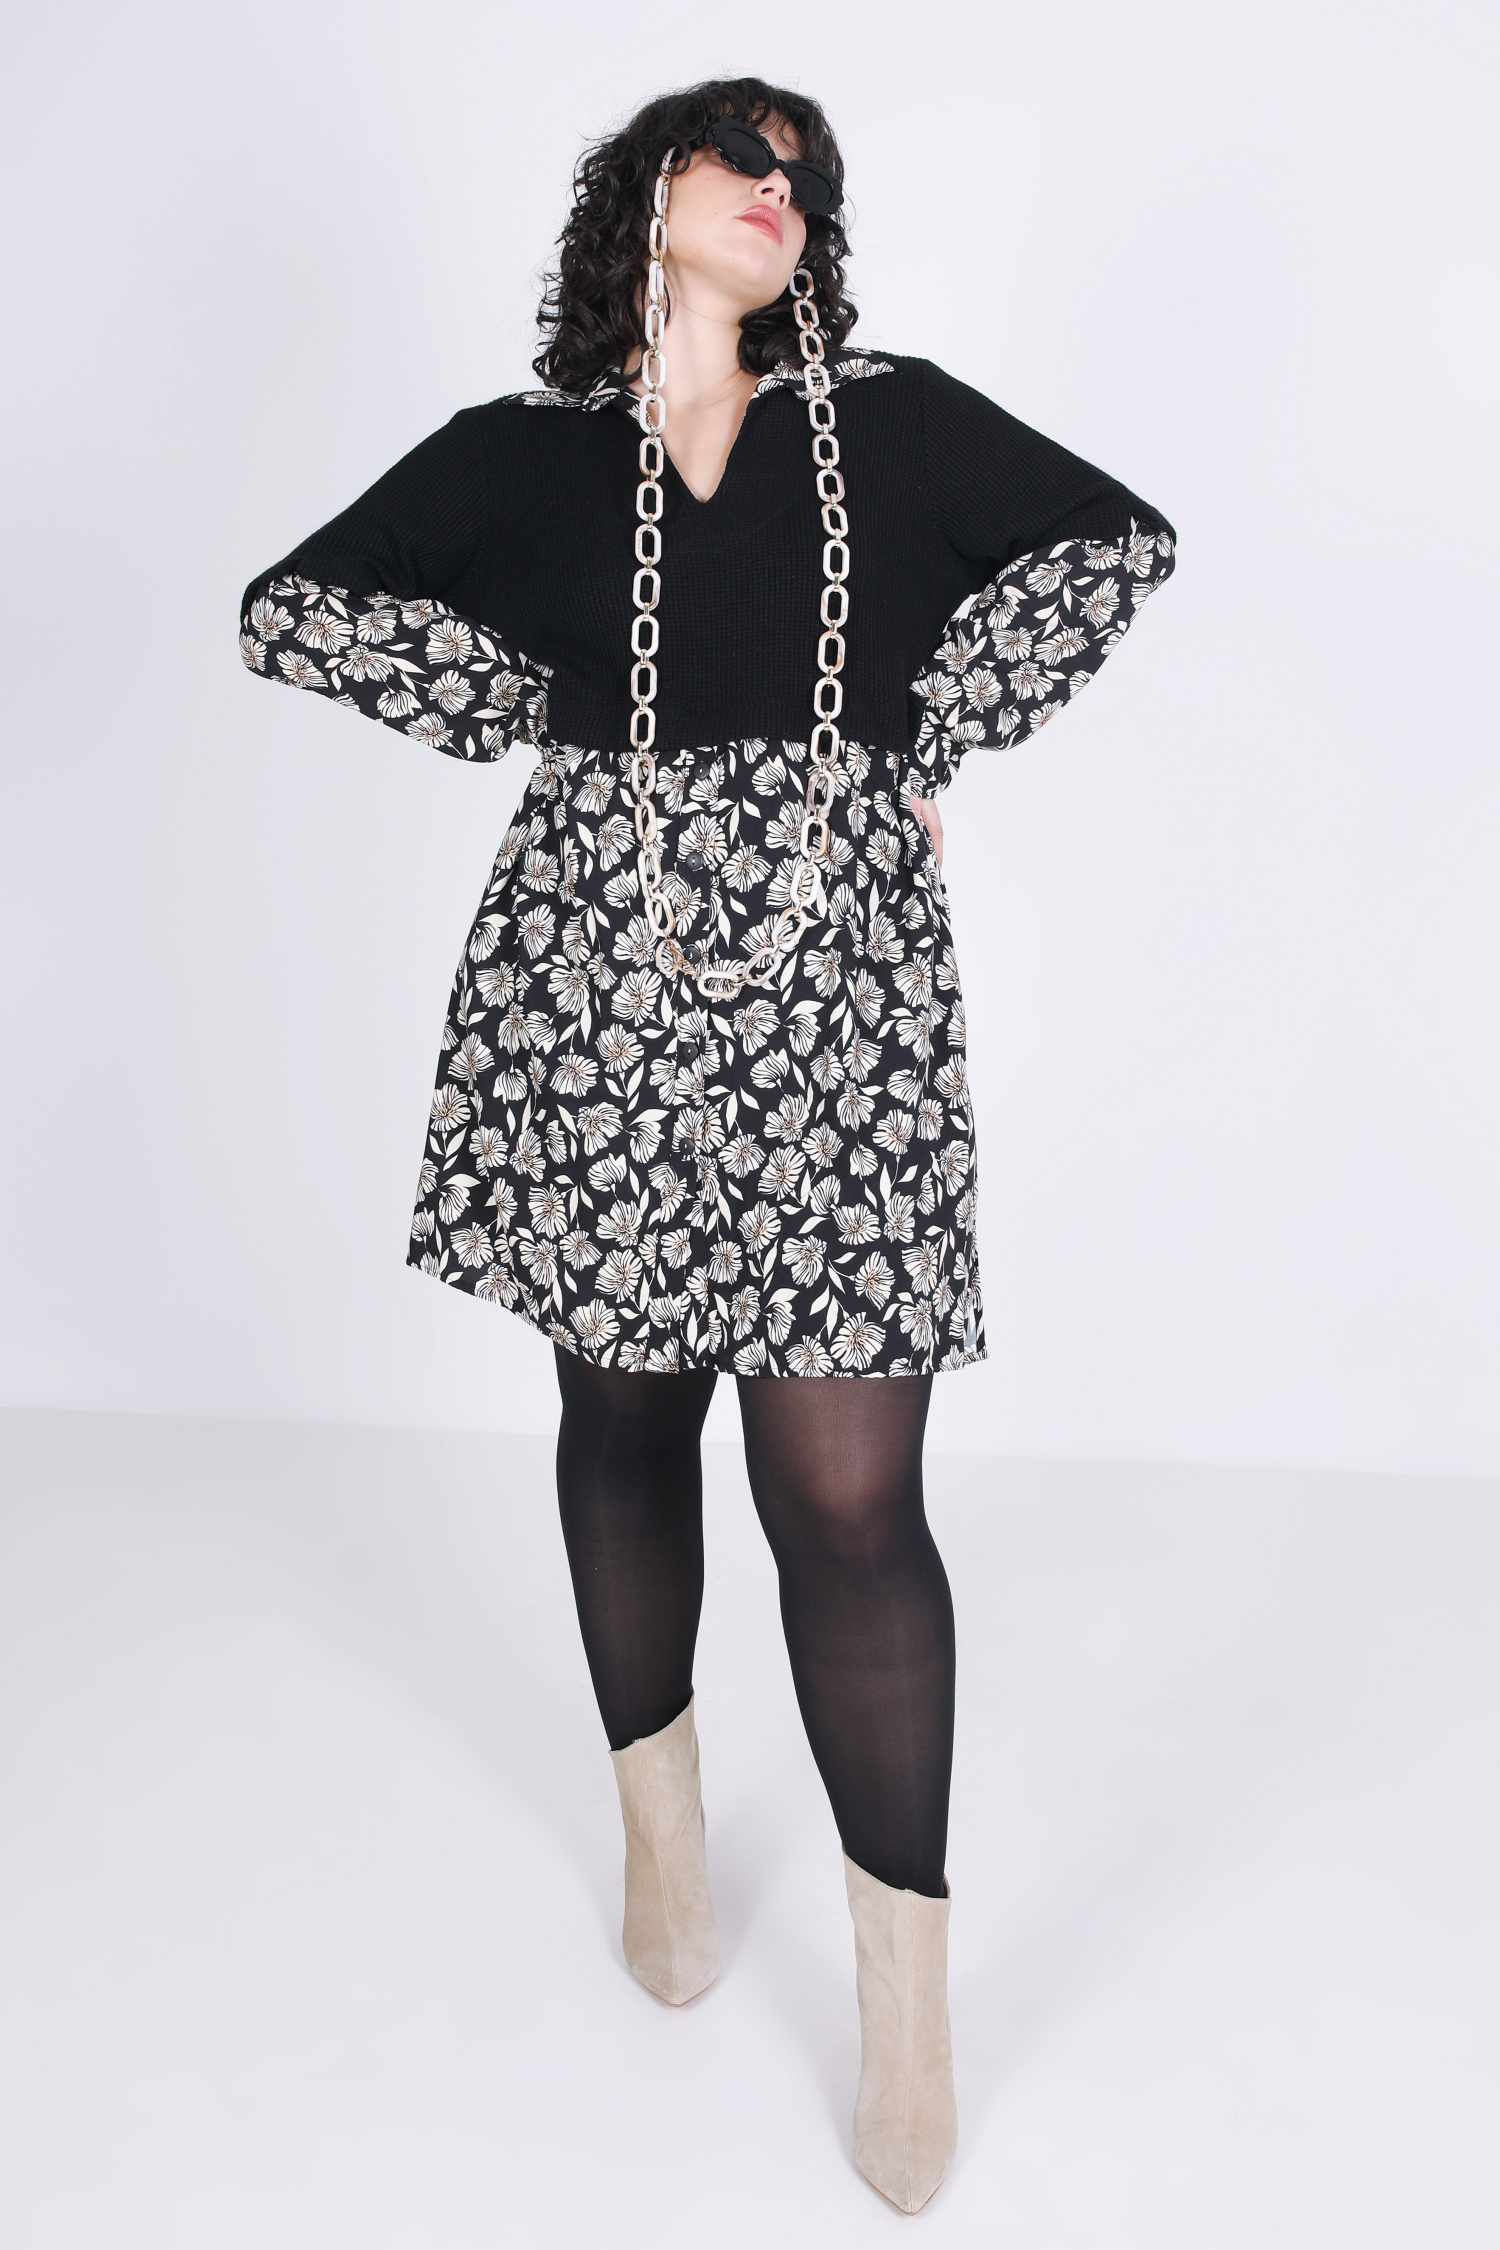 Mixed-material dress in plain knit and printed two-in-one effect